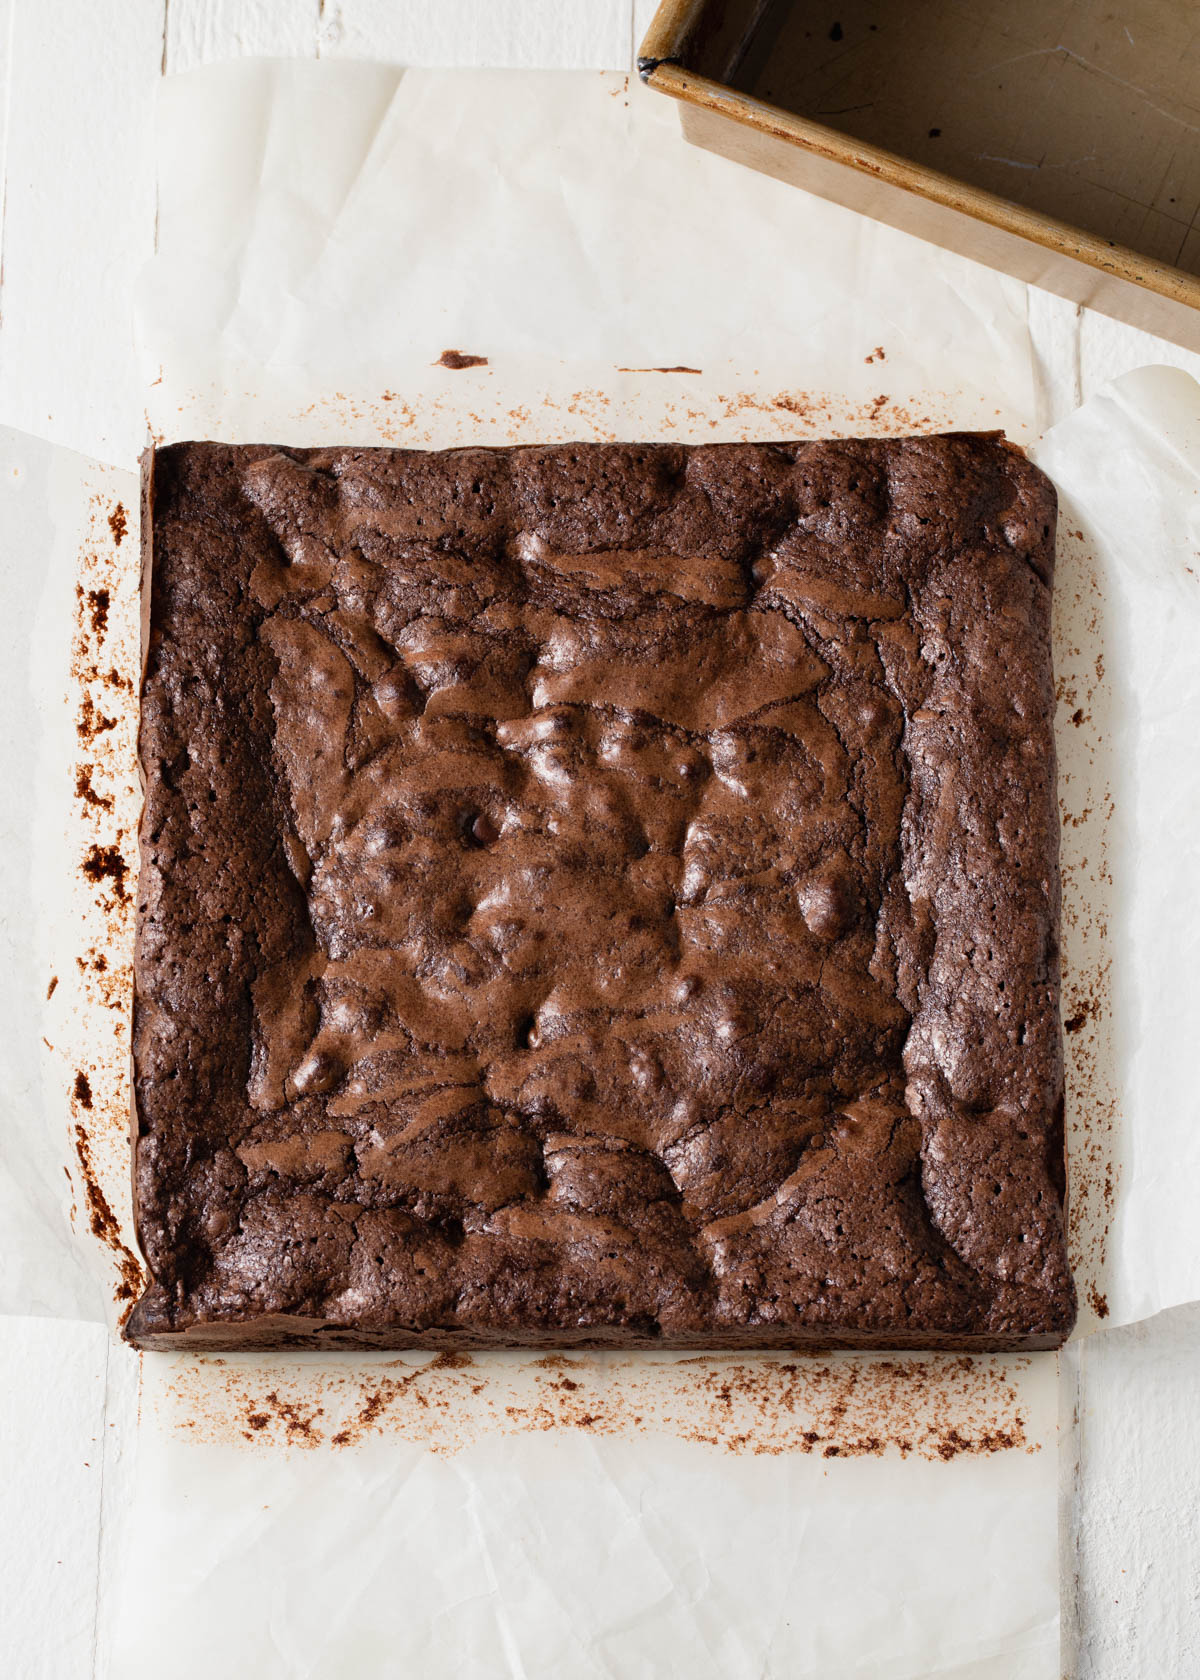 Baked cocoa powder brownies with a crinkly top